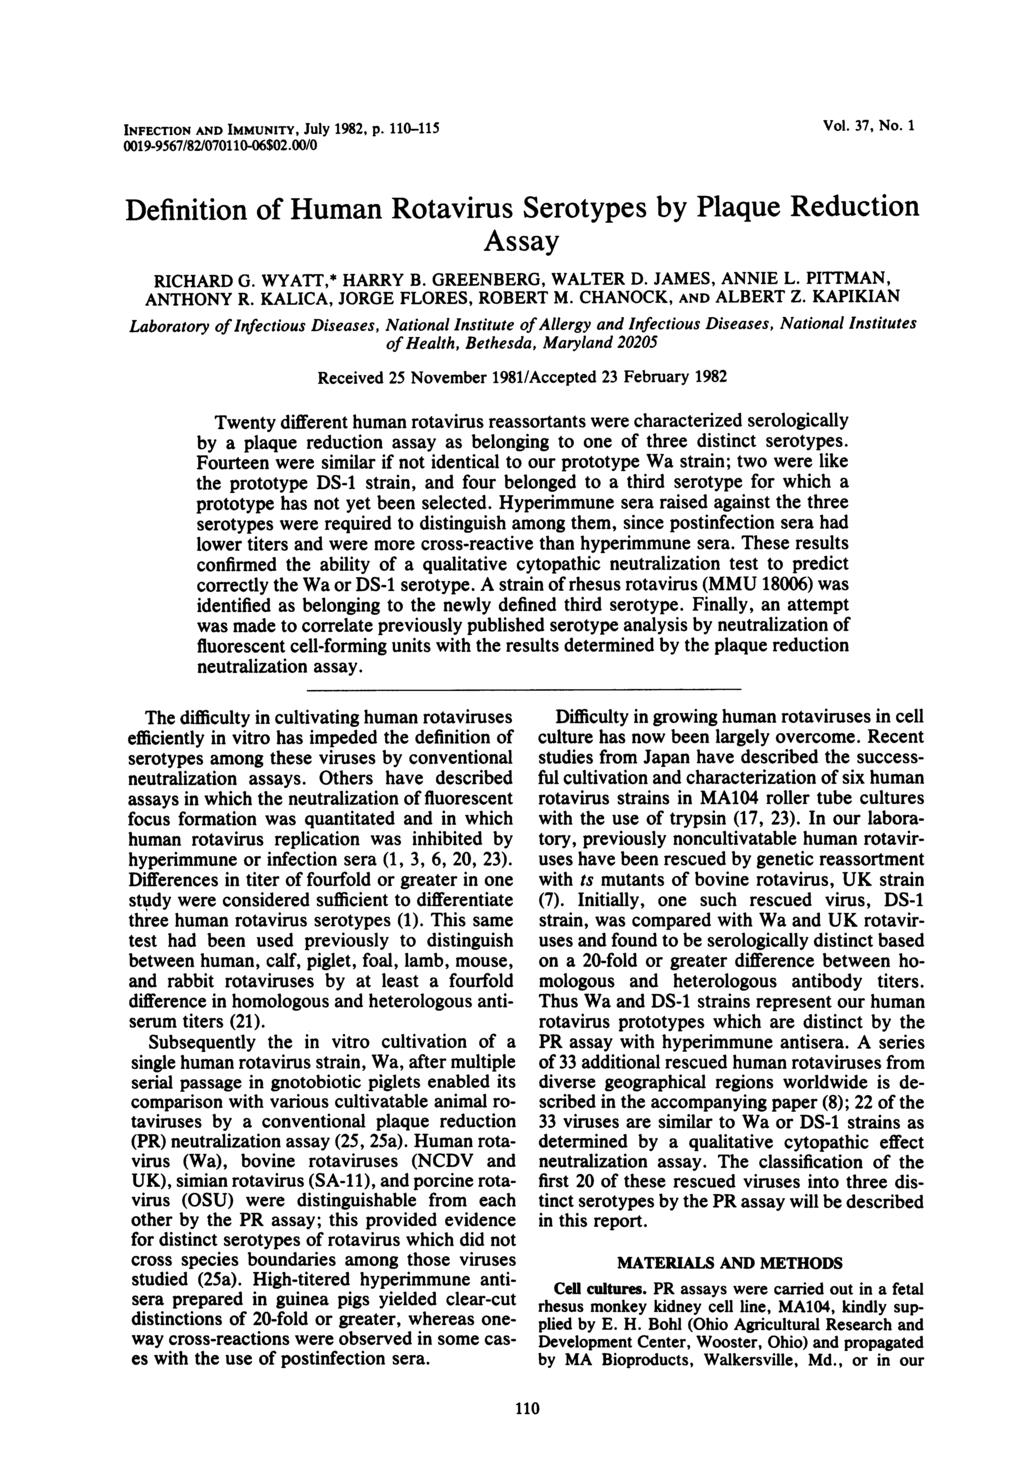 INFECTION AND IMMUNITY, July 1982, p. 110-115 Vol. 37, No. 1 0019-9567/82/070110-06$02.00/0 Definition of Human Rotavirus Serotypes by Plaque Reduction Assay RICHARD G. WYATT,* HARRY B.